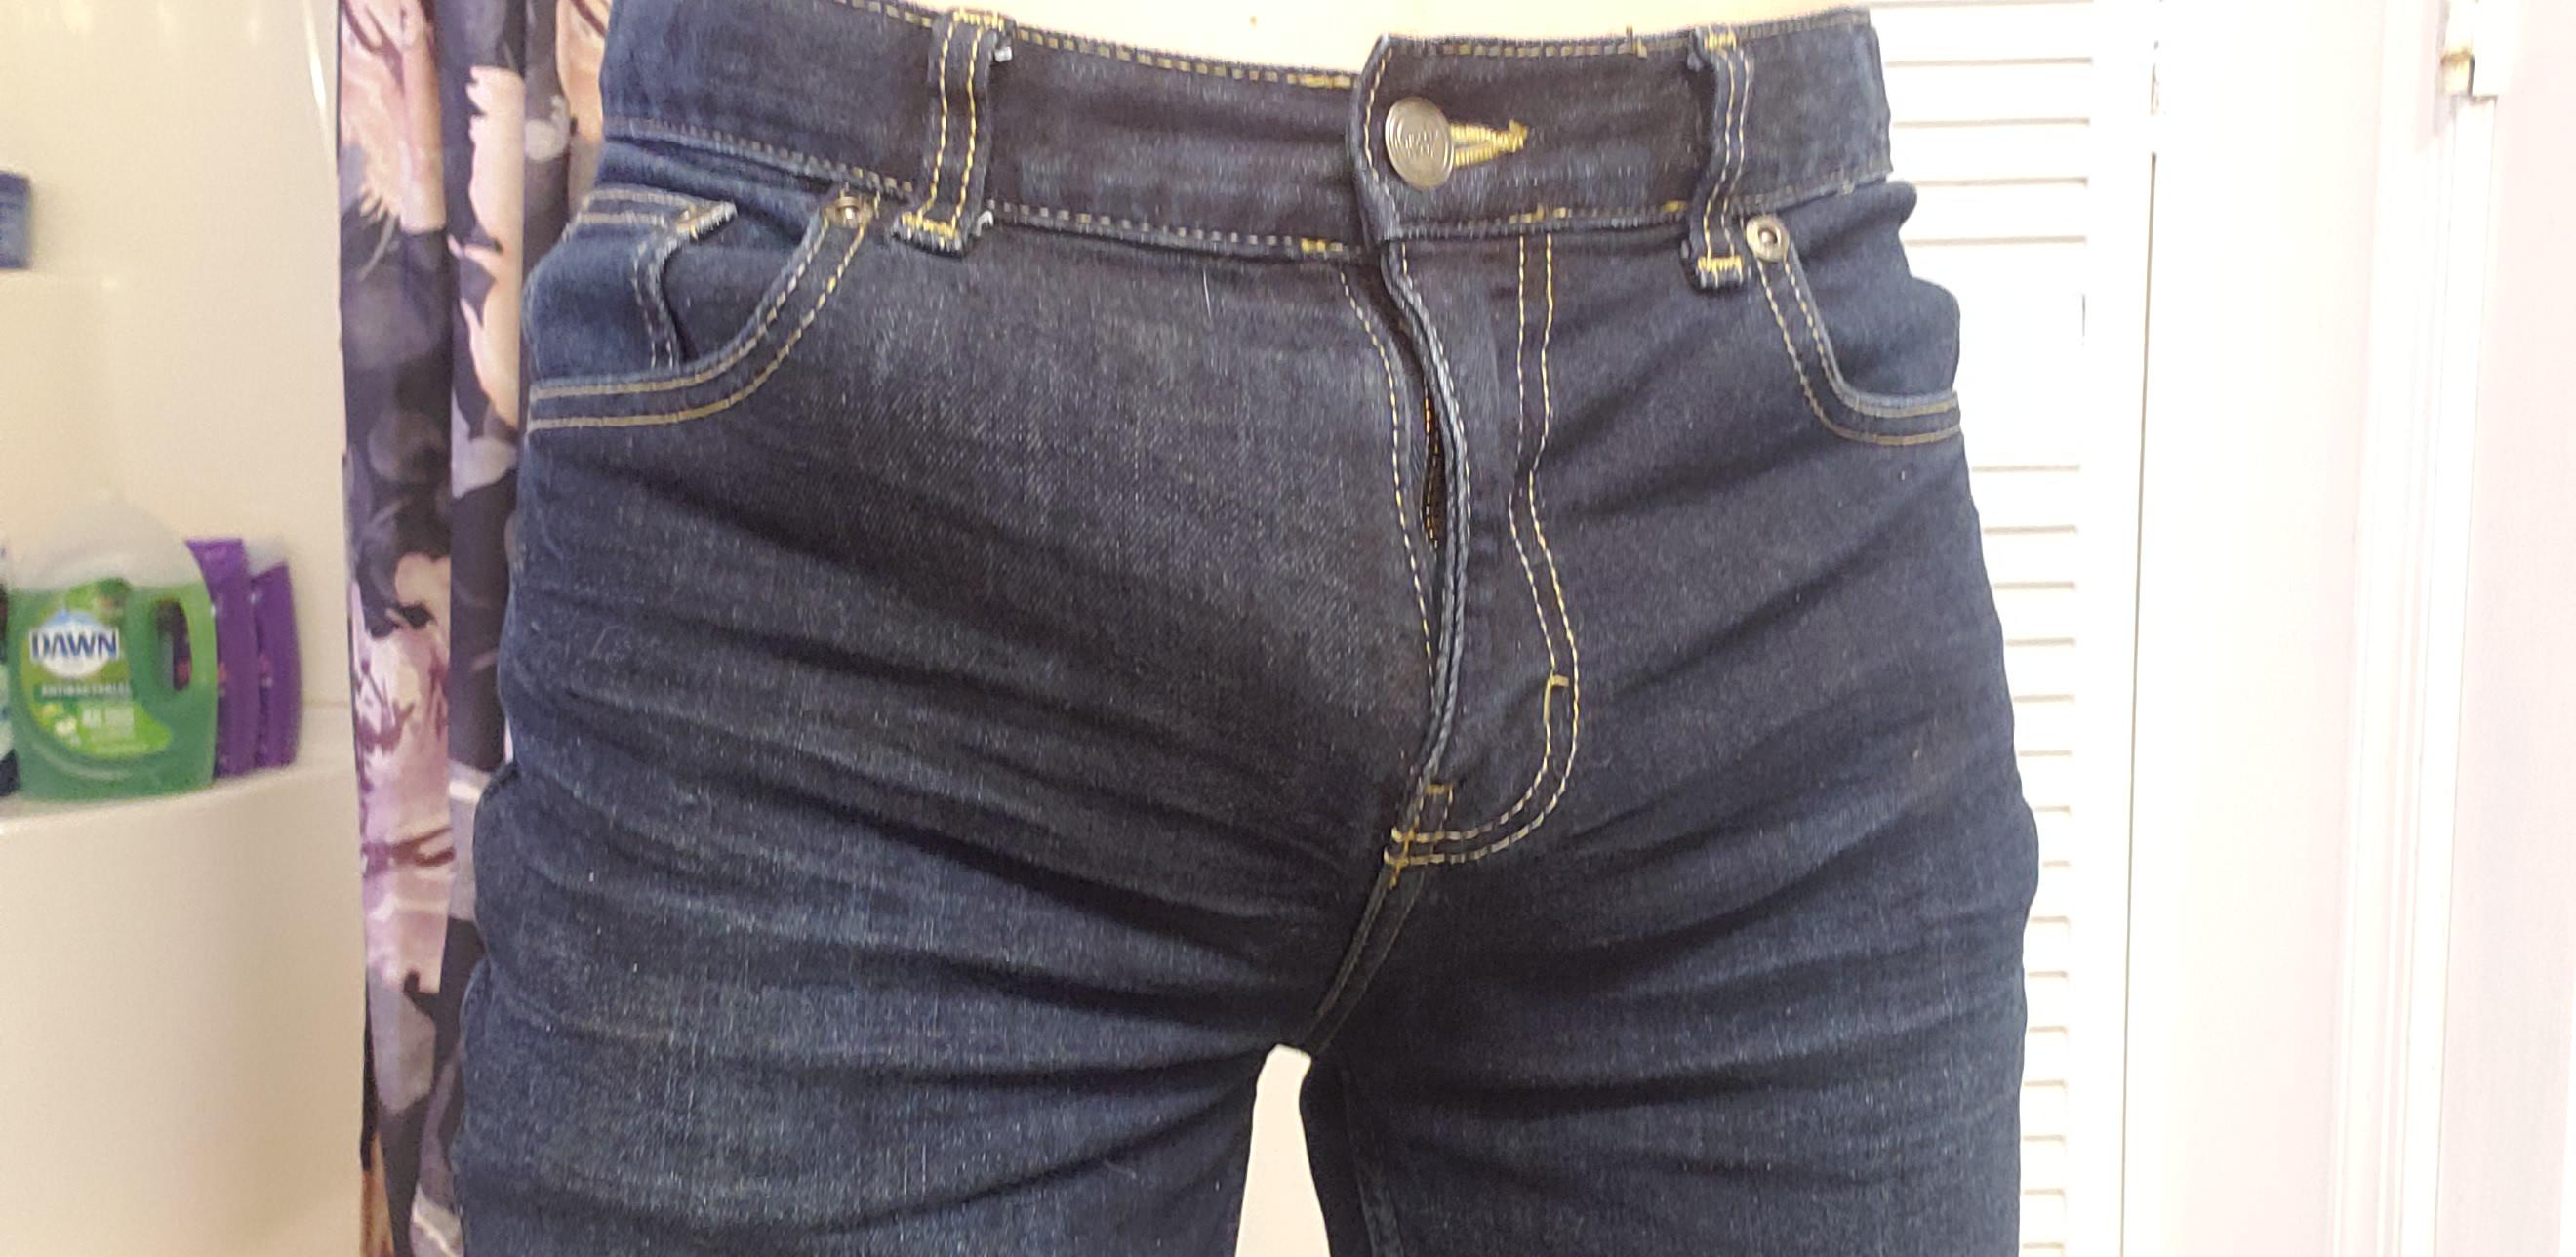 Just a bulge through my jeans | Scrolller